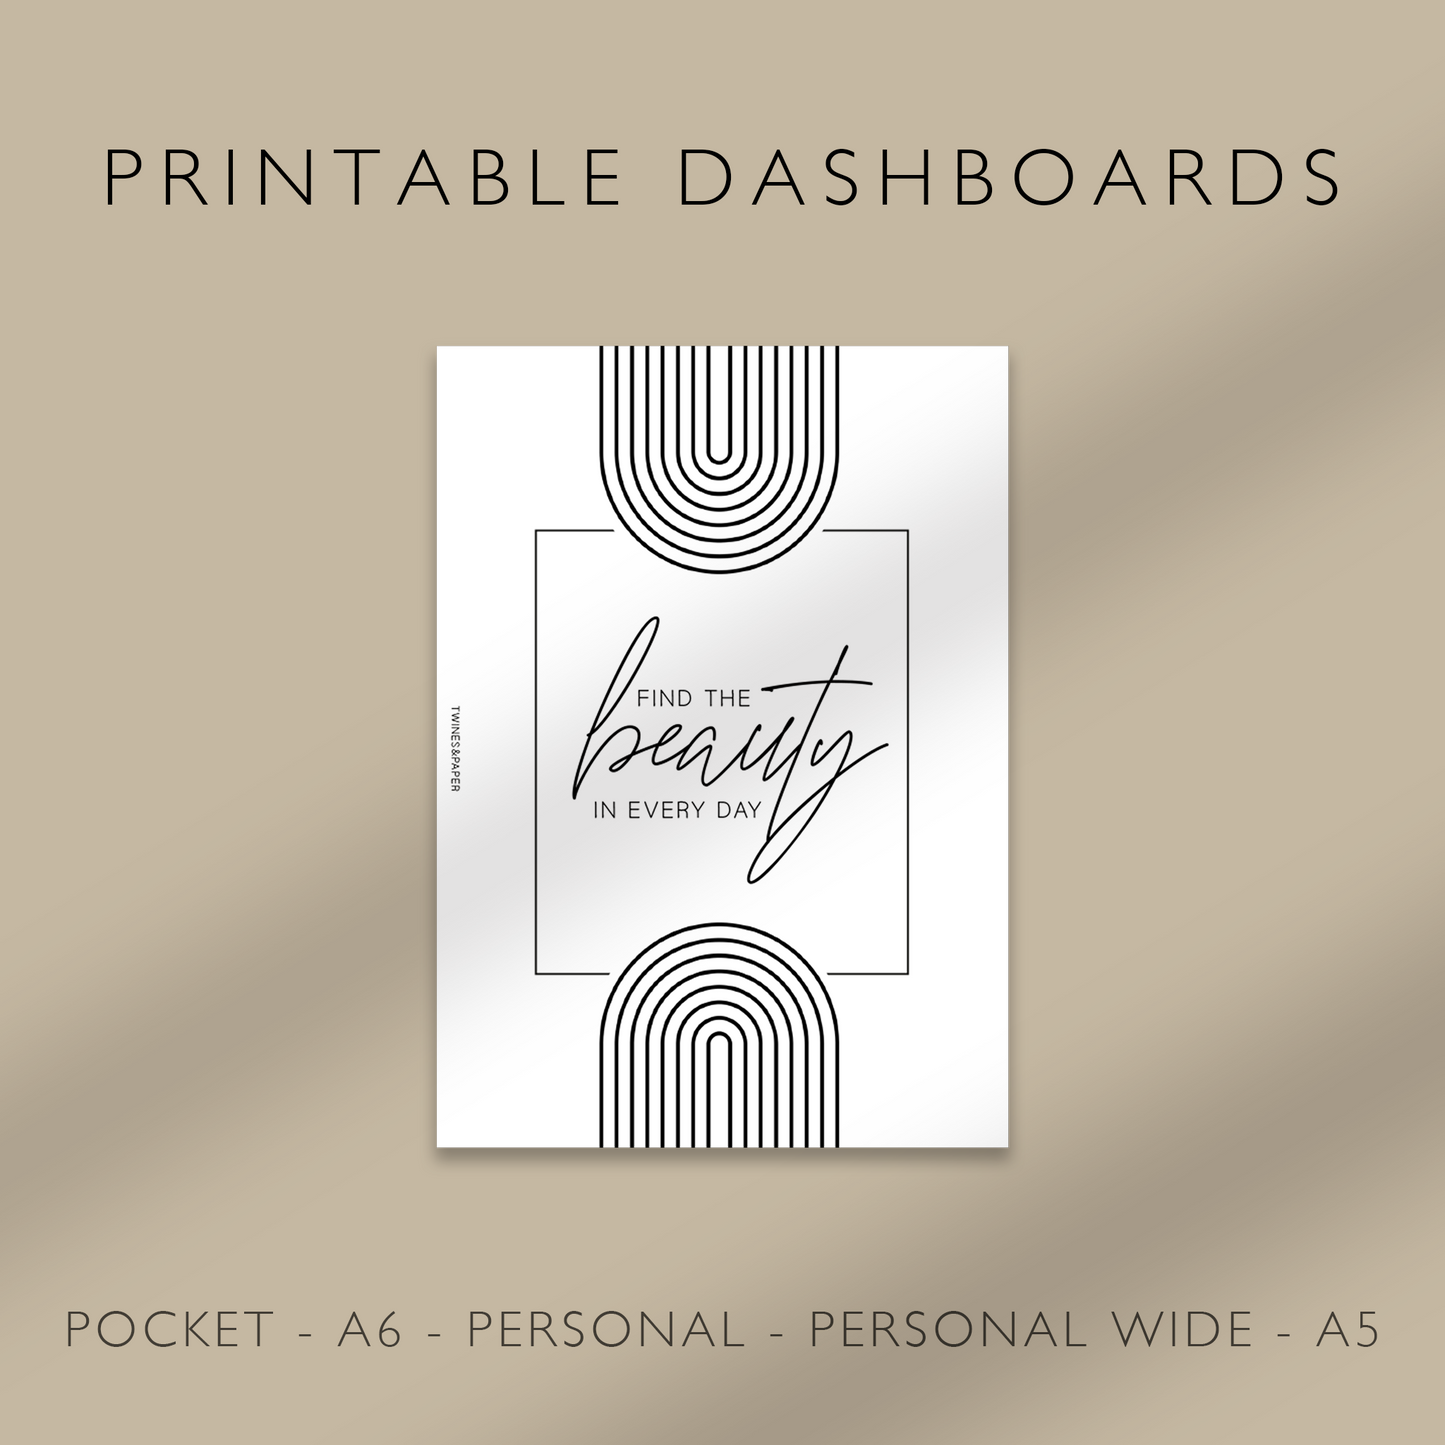 "Find The Beauty In Every Day" Printable Planner Dashboards Pocket, A6, Personal, Personal Wide, A5